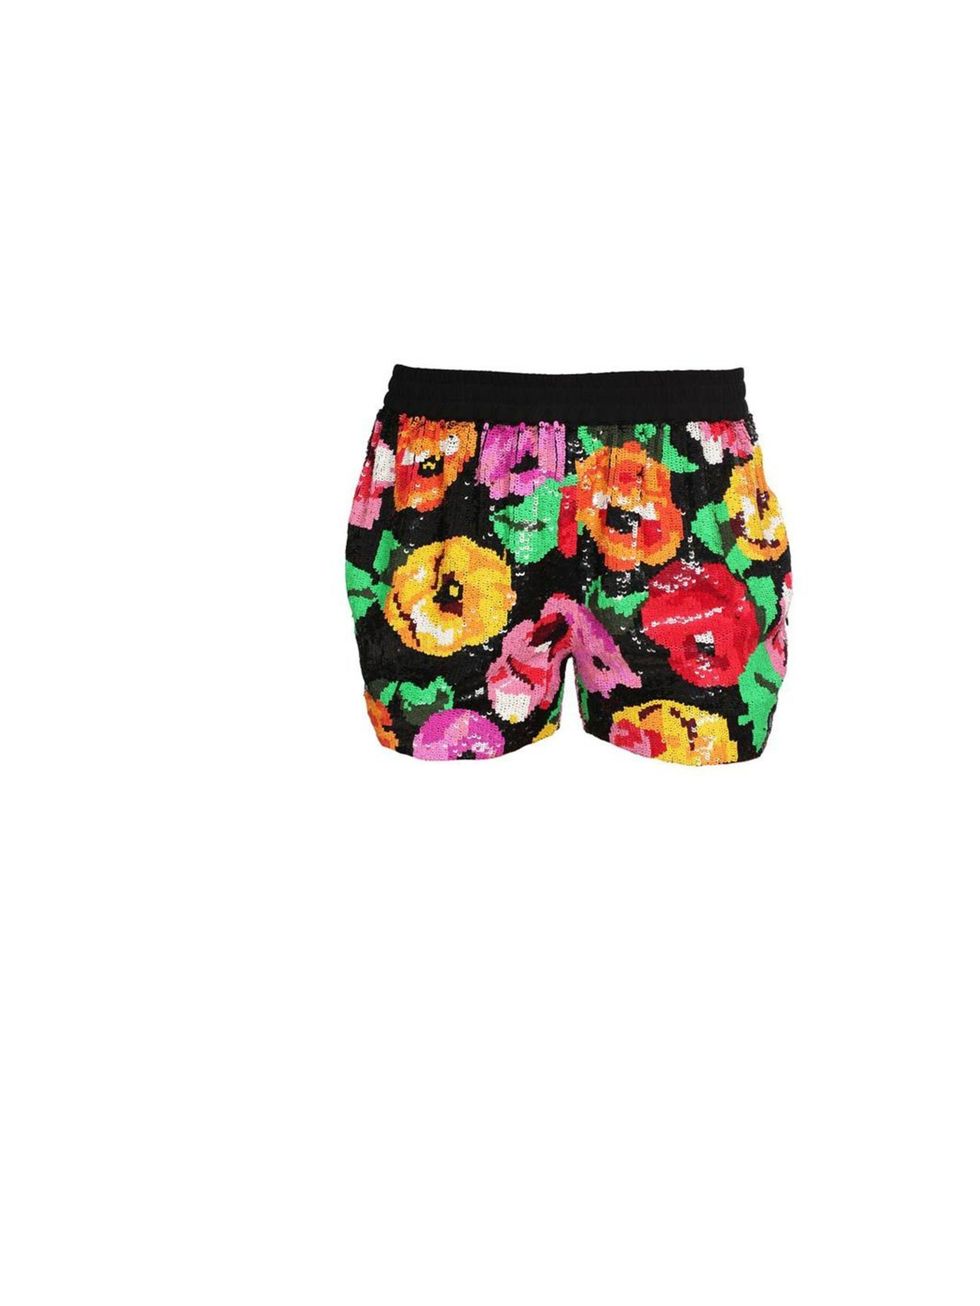 <p>Ashish floral sequinned shorts, £470, at <a href="http://www.brownsfashion.com/Product/Floral_sequined_shorts/Product.aspx?p=3514394">Browns Fashion</a></p>